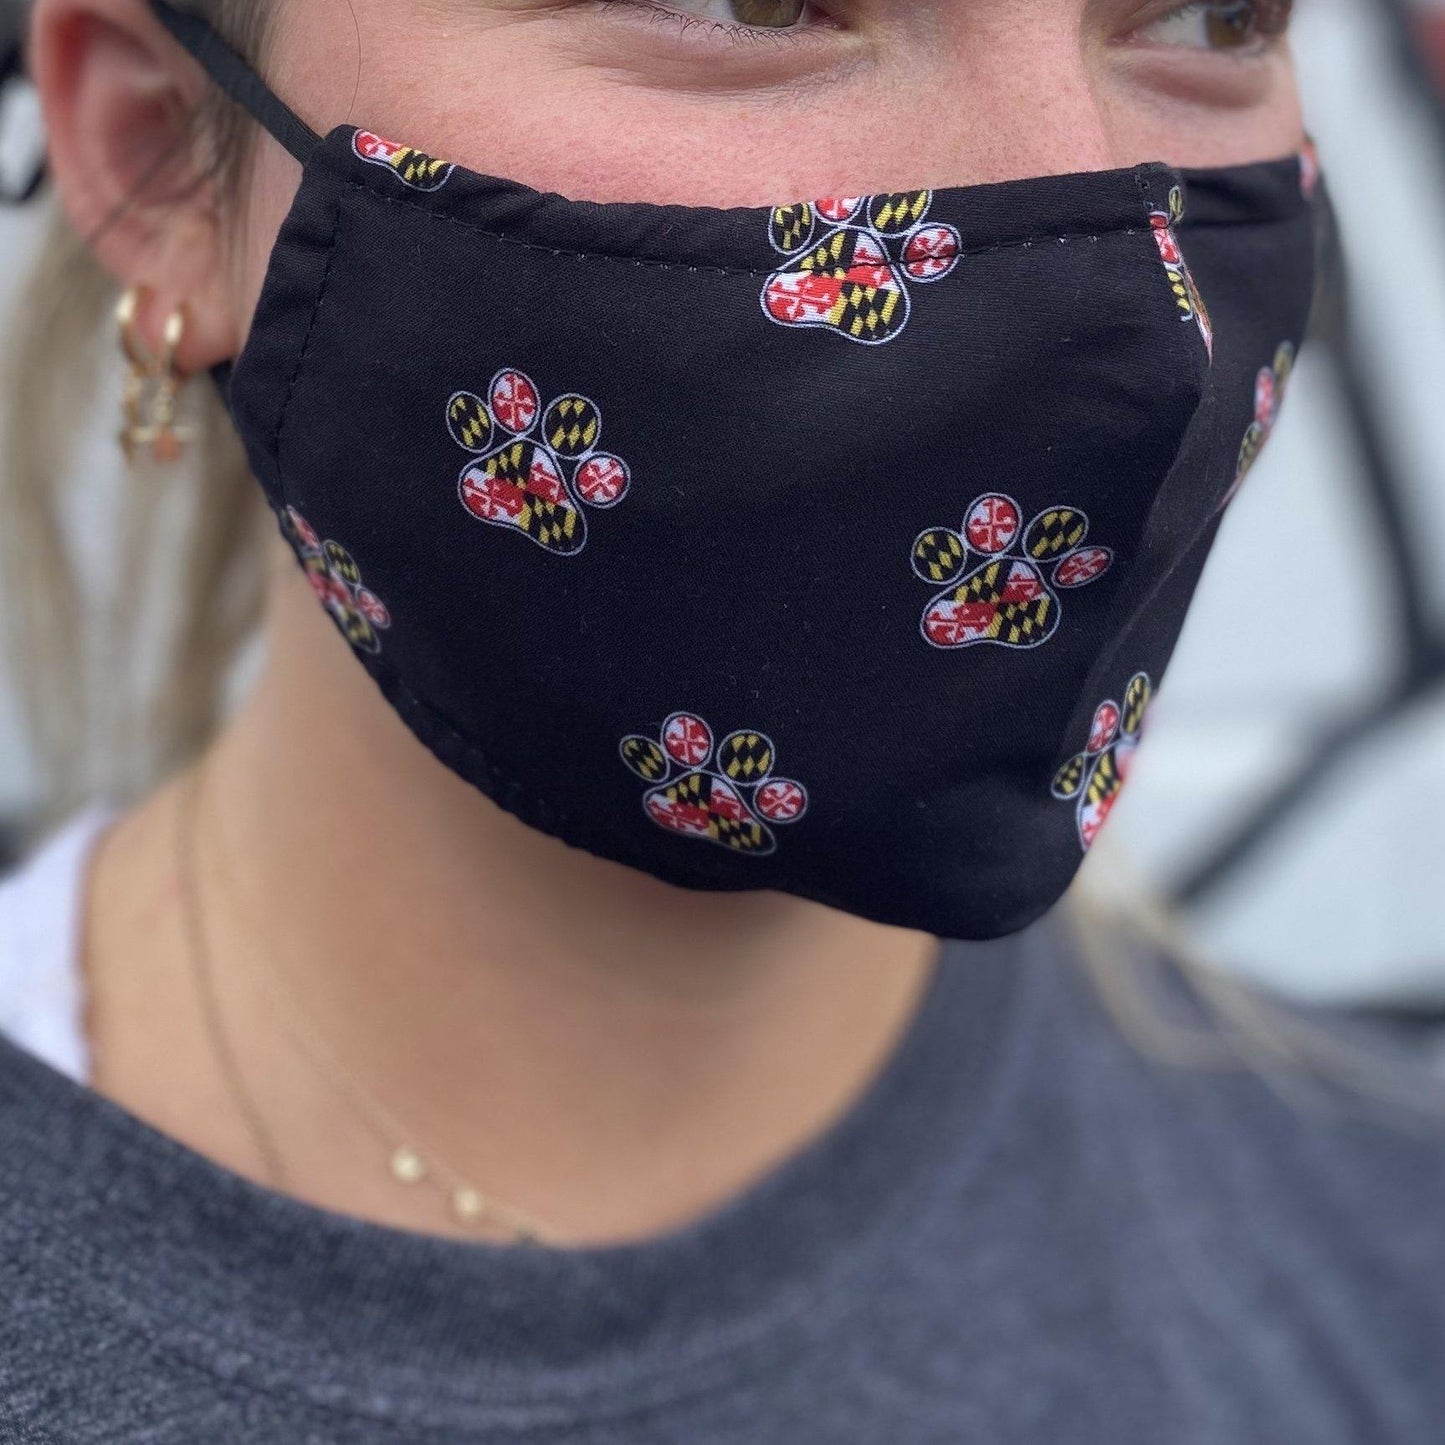 Maryland Paw Print Pattern (Black) / Face Mask - Route One Apparel